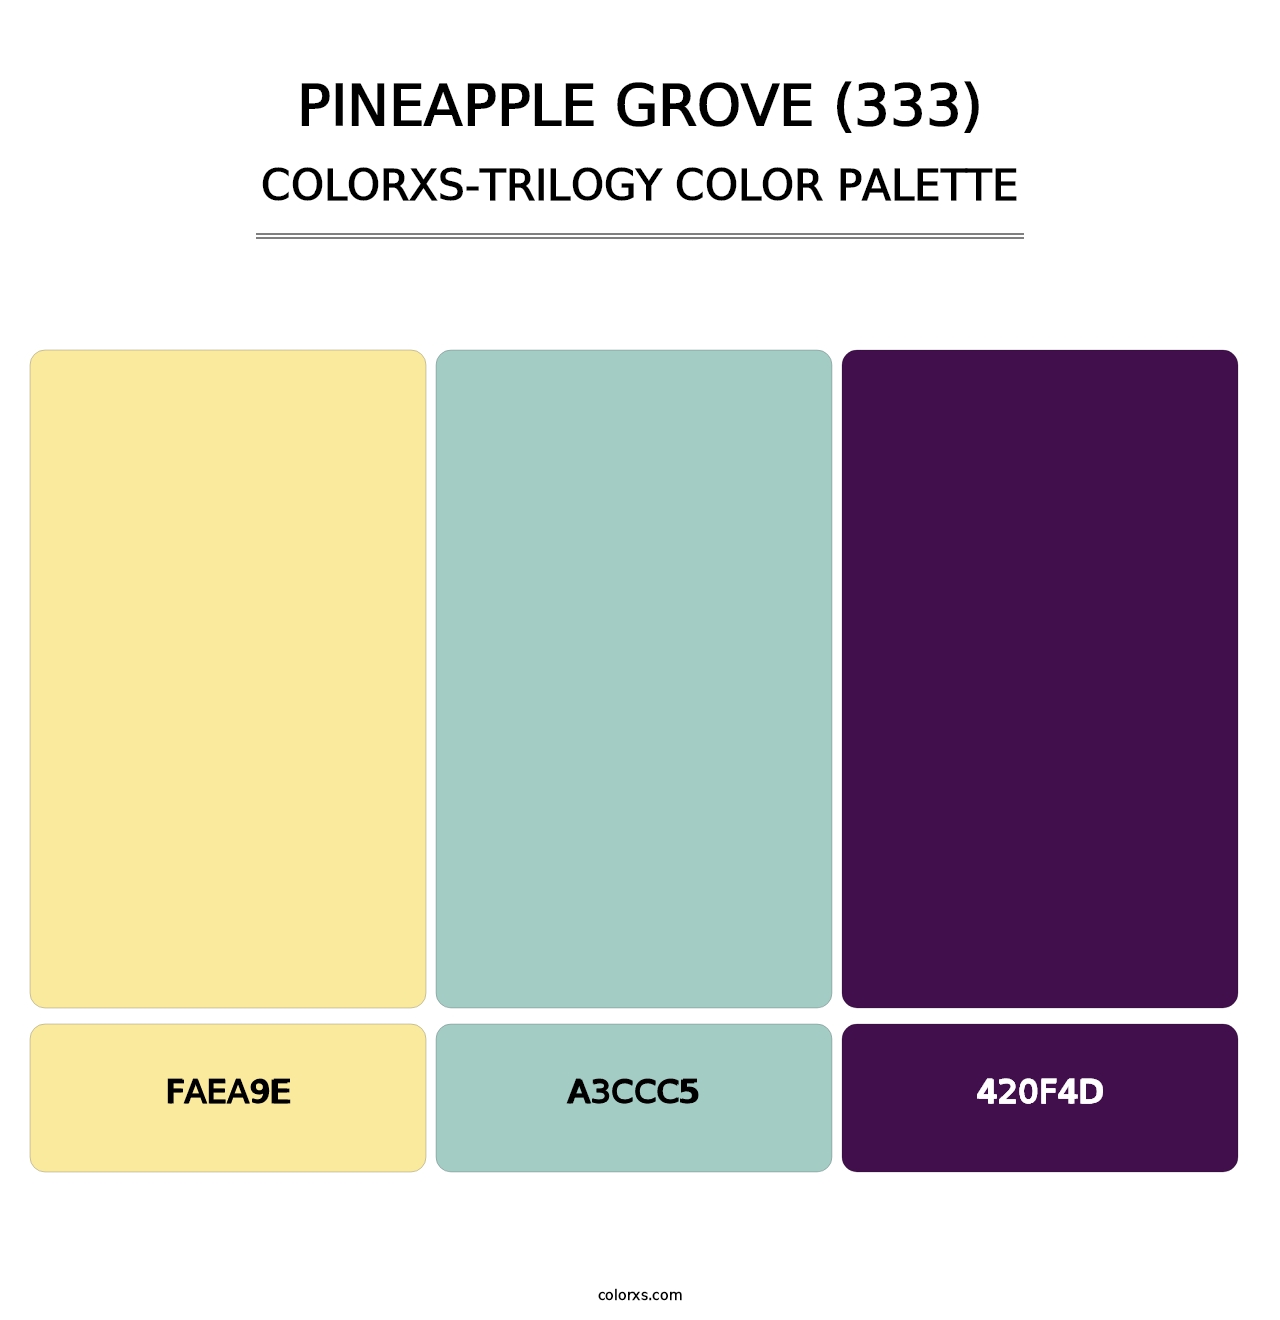 Pineapple Grove (333) - Colorxs Trilogy Palette